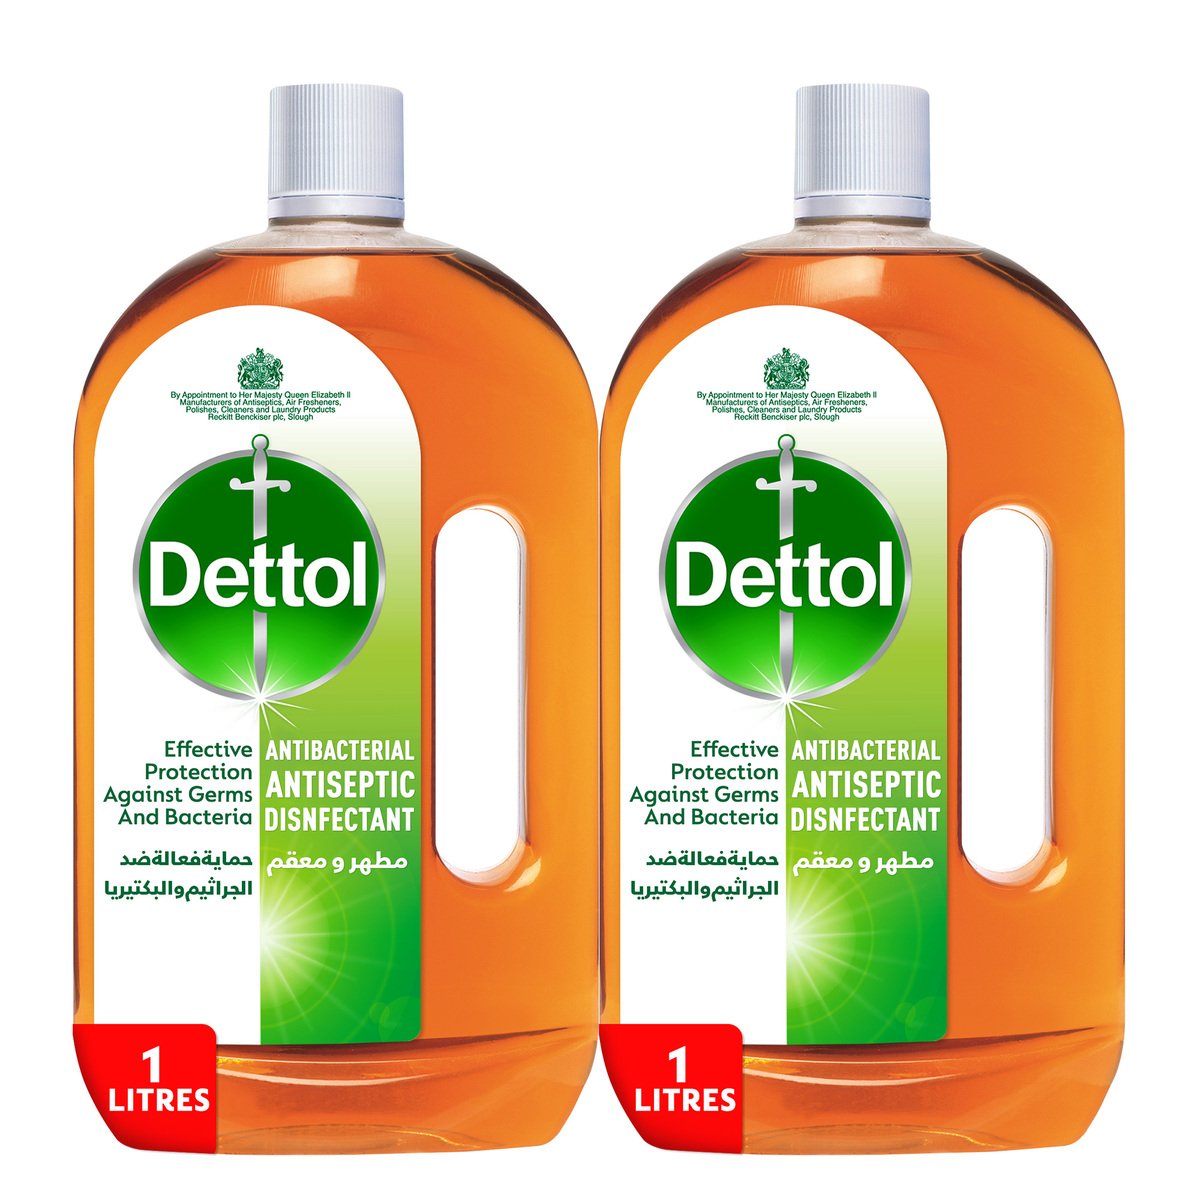 Buy Dettol Antiseptic Disinfectant Value Pack 2 x 1 Litre Online at Best Price | Disinfectants | Lulu Kuwait in Kuwait